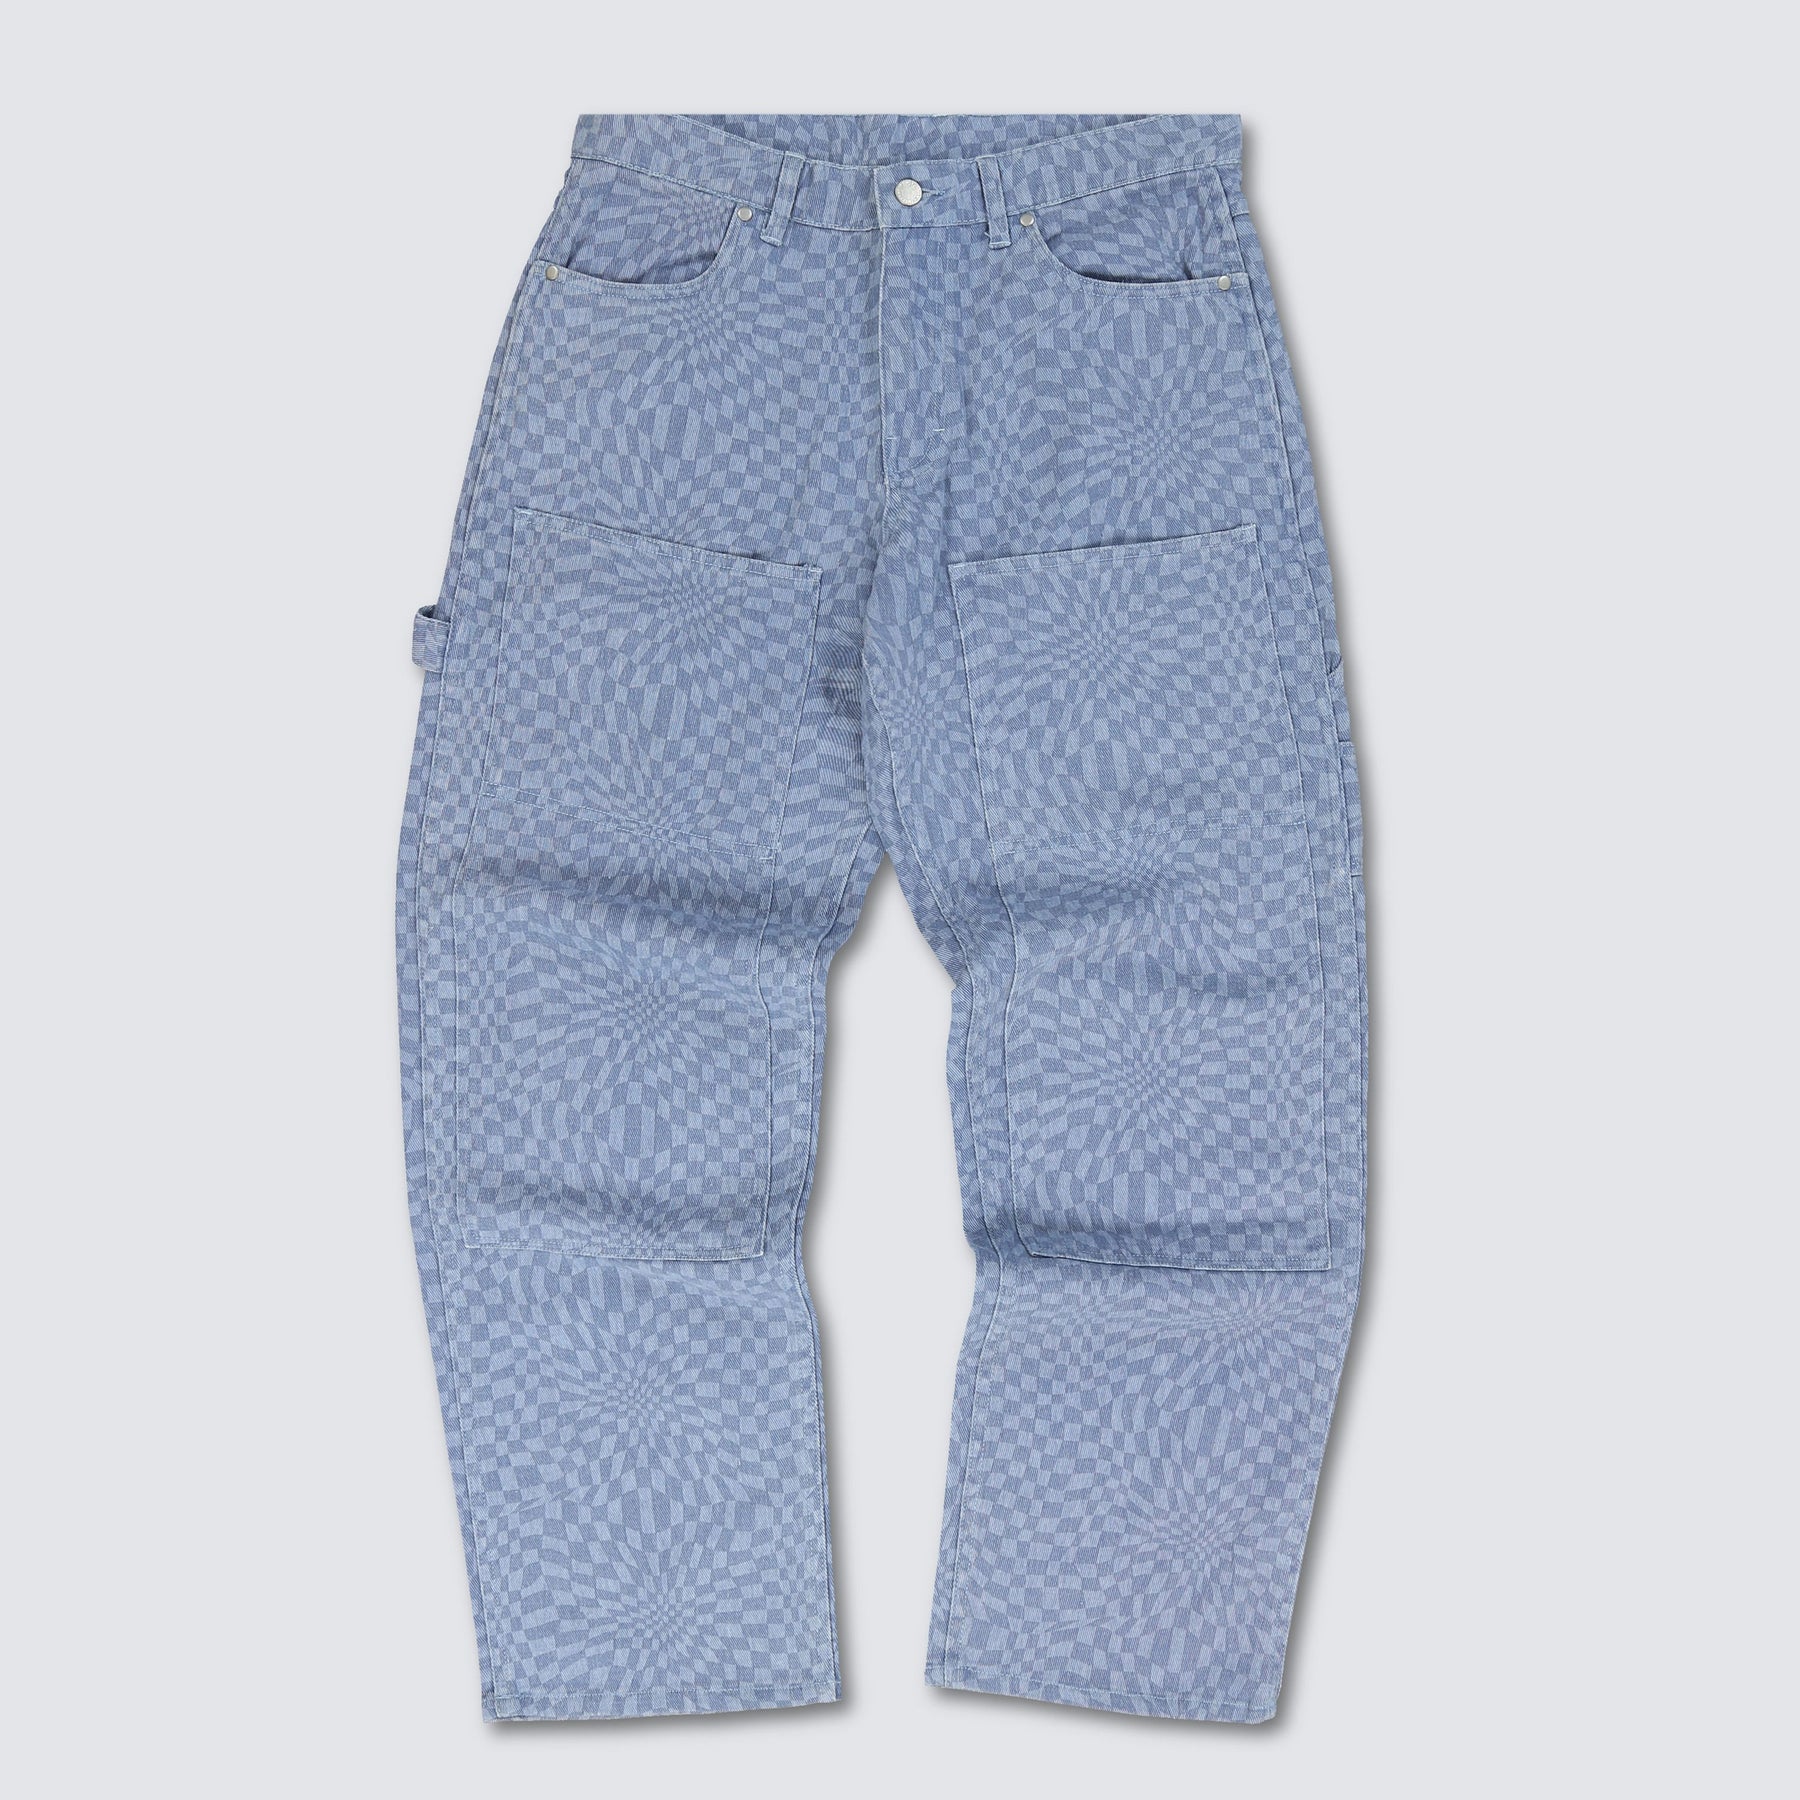 Washy Double Knee Work Pants in Blue